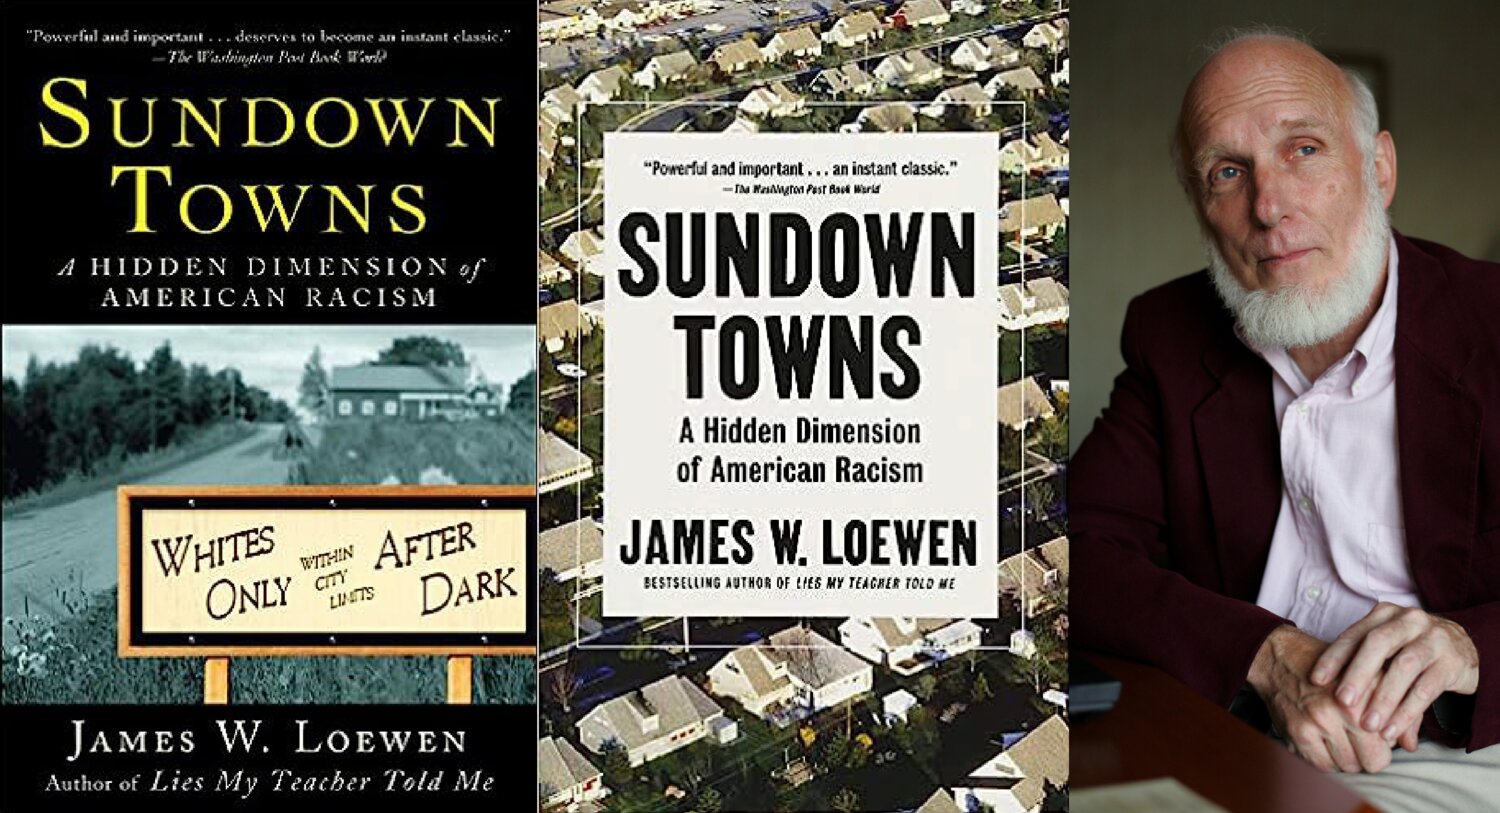 James W. Loewen is pictured along with the cover of two of his books focused on "sundown towns."